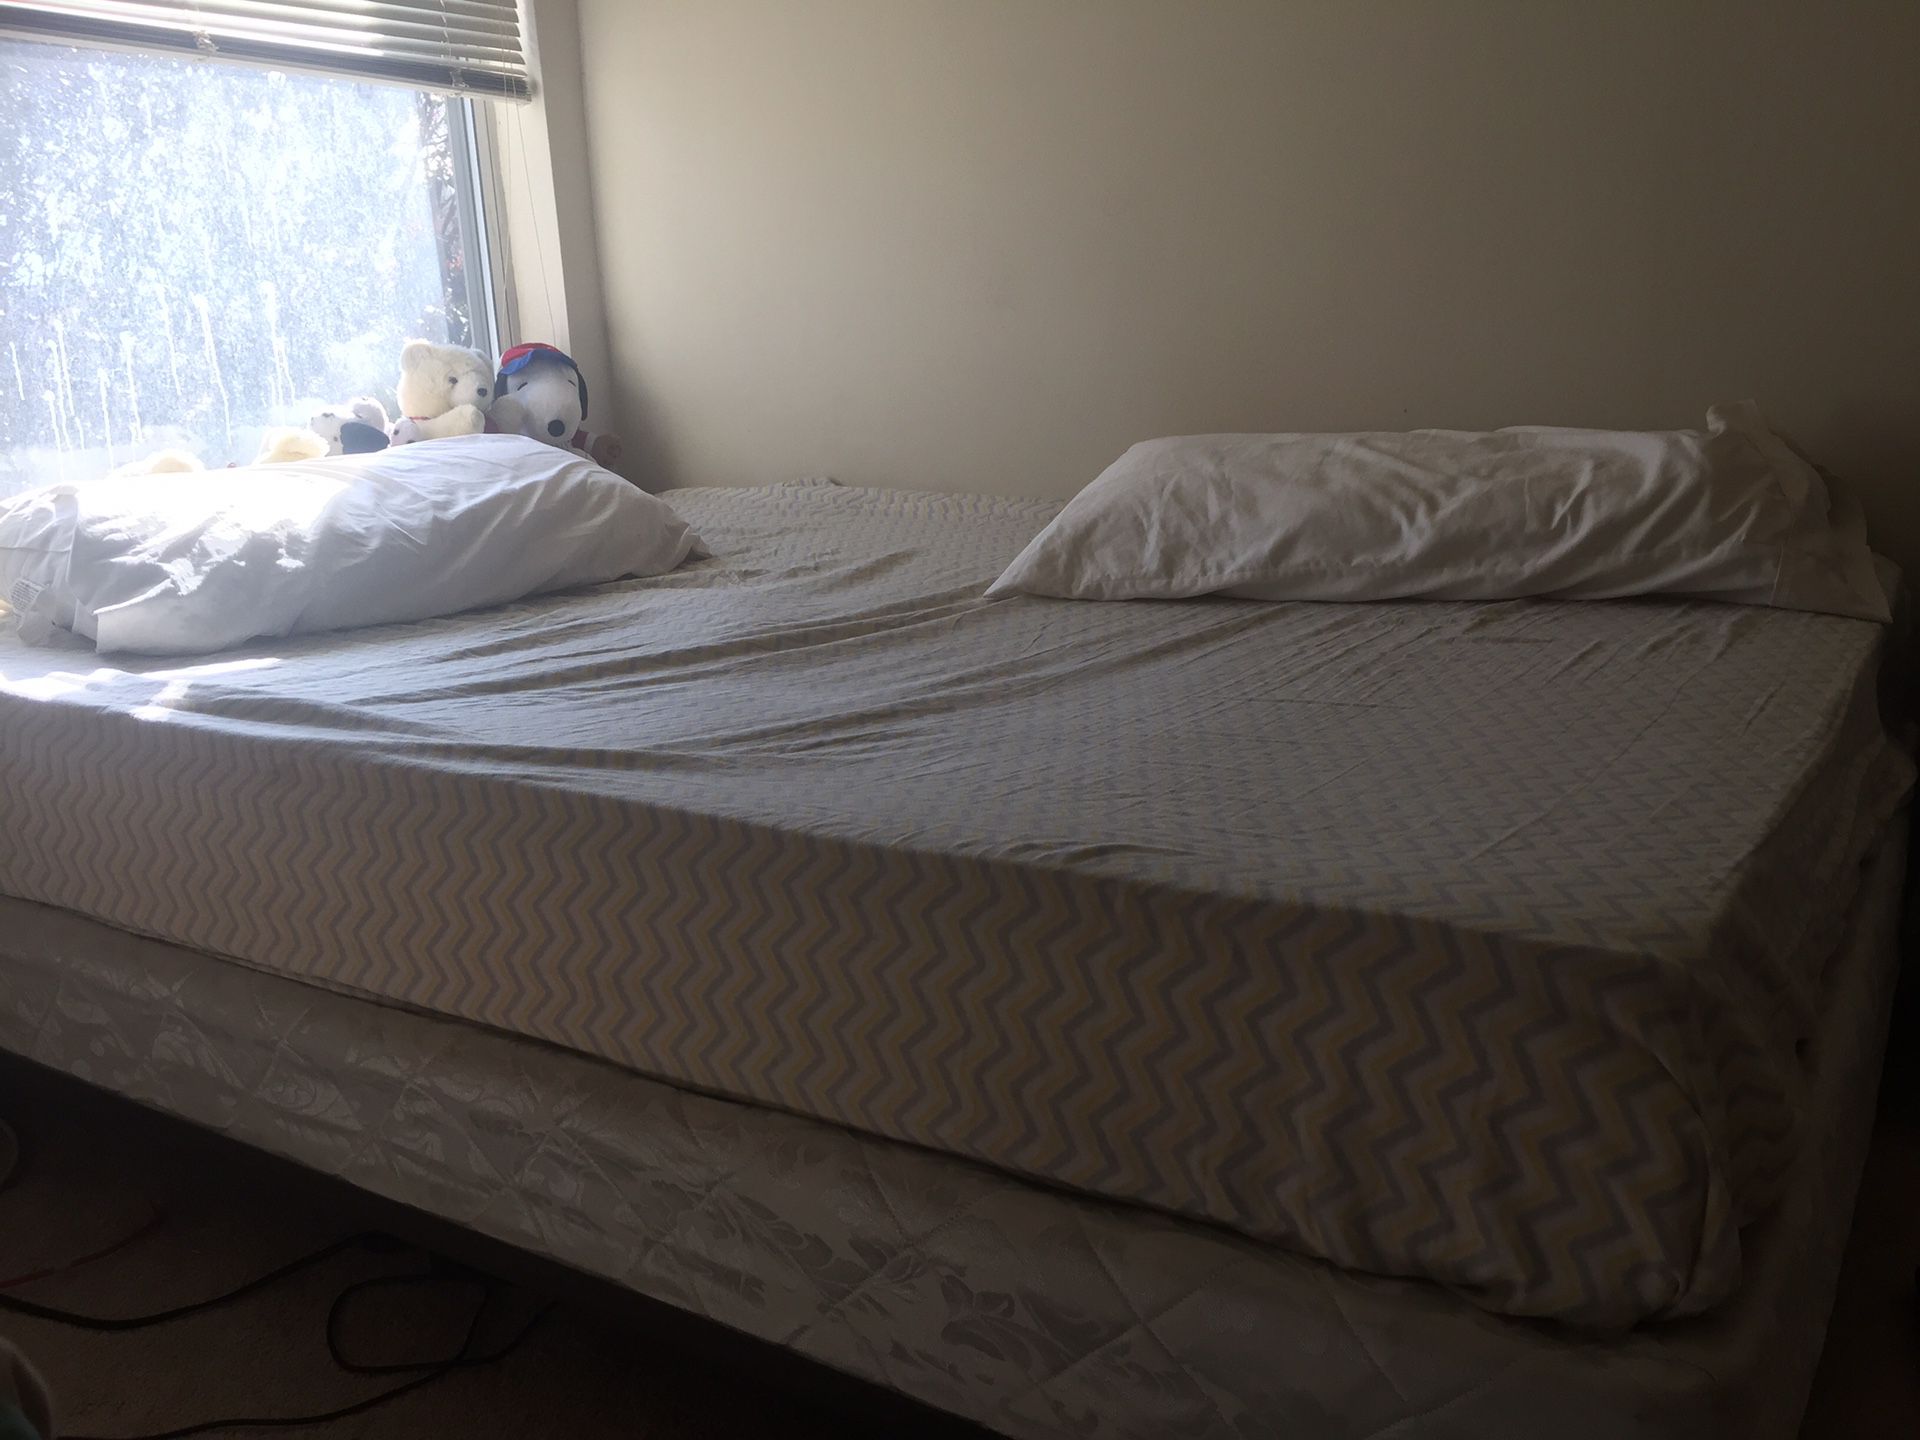 Full size bed frame , box and 8 inch memory foam Mattress